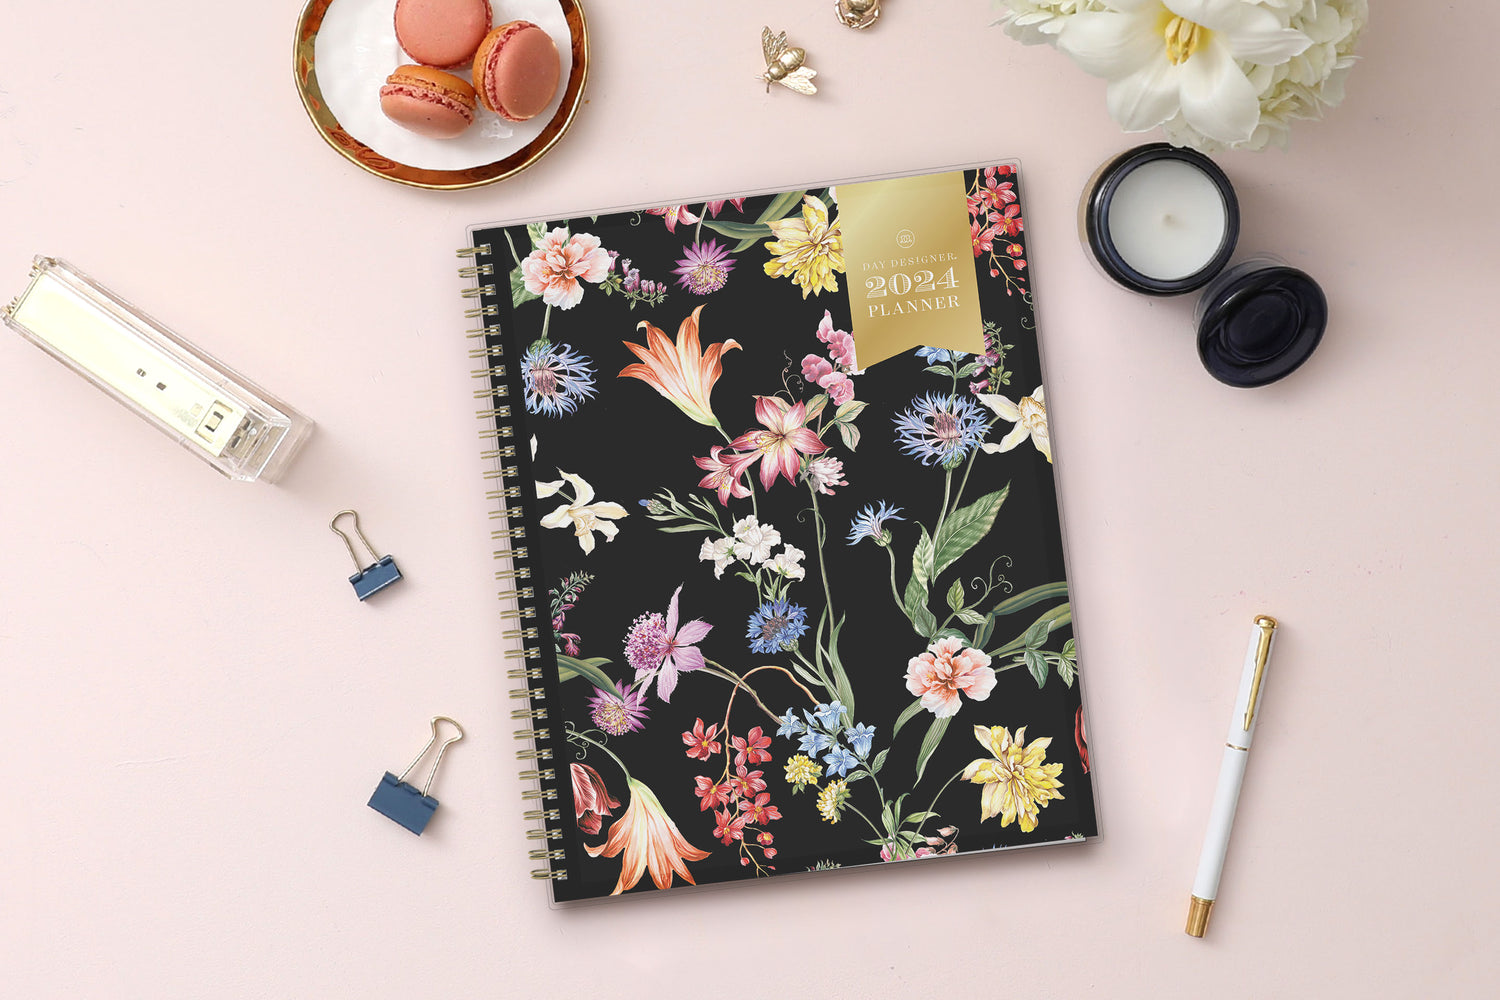 Day Designer 2023-2024 Mini Daily Planner, July 2023 - June 2024, 6x8.125  Page Size (Wildflowers)